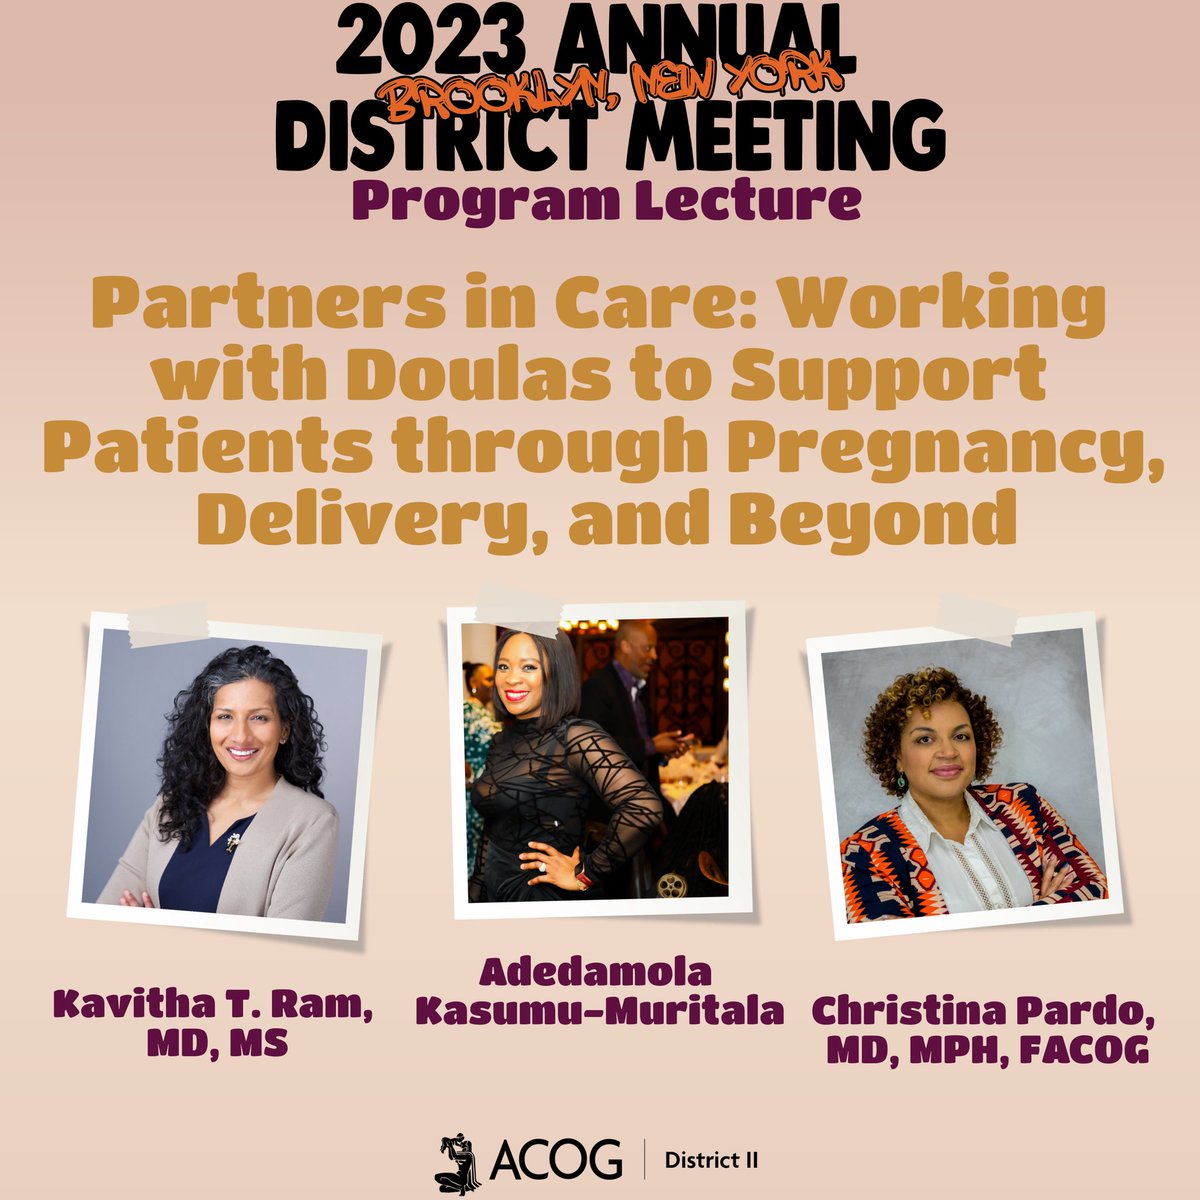 🔸 Partners in Care: Working with Doulas to Support Patients through Pregnancy, Delivery, and Beyond Kavitha T. Ram, MD, MS, (she/her), Christina Pardo, MD, MPH, FACOG, and Adedamola Kasumu-Muritala (she/her)